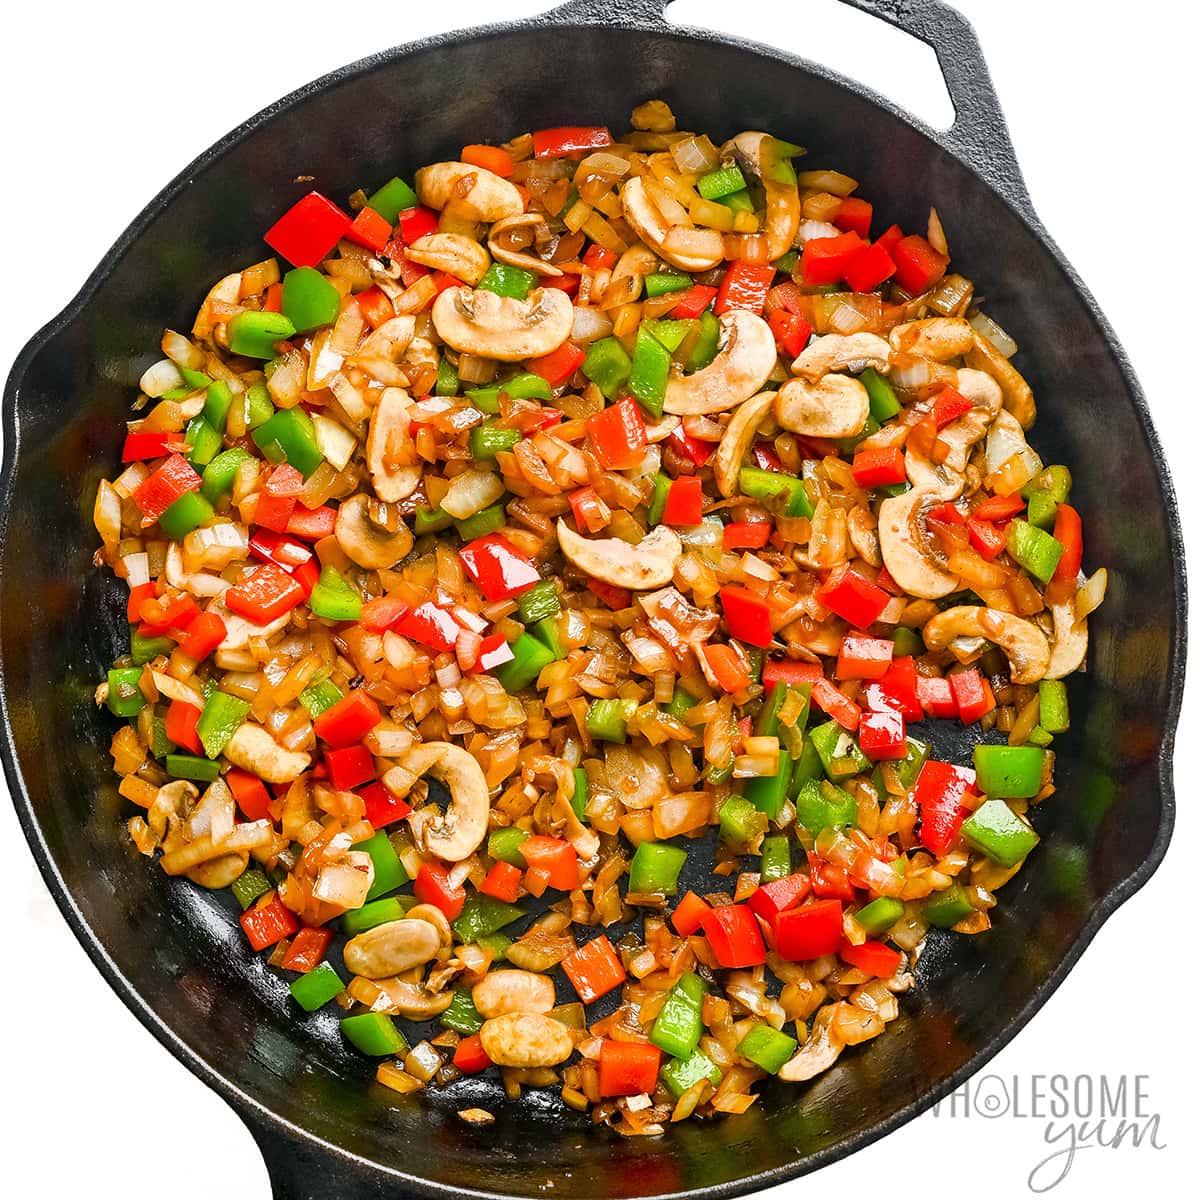 Veggies sauteed in a skillet.